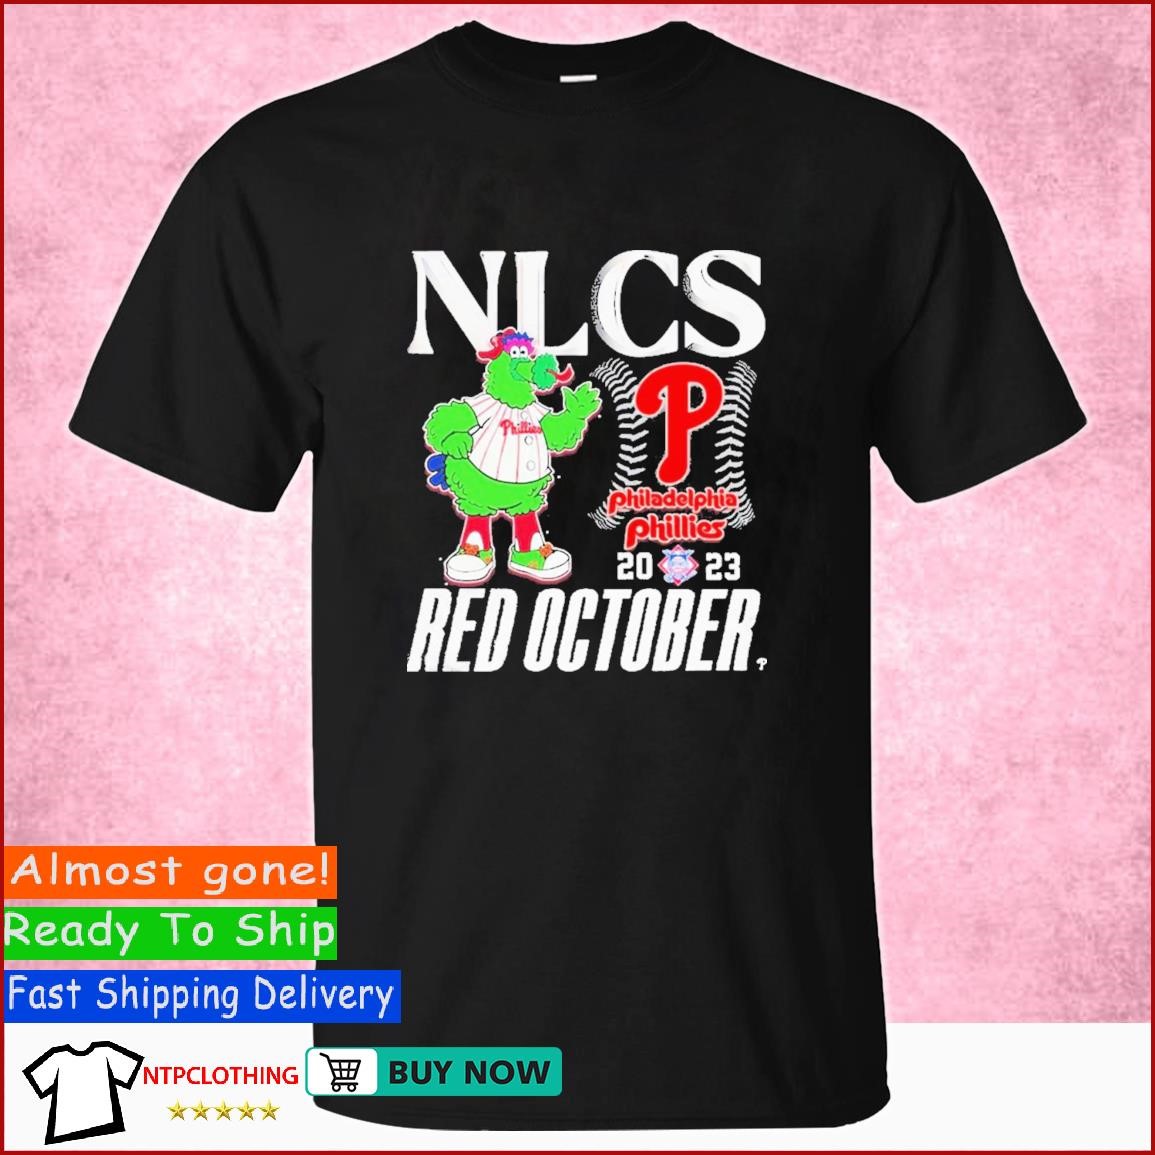 Nlcs Phillies T-Shirts for Sale